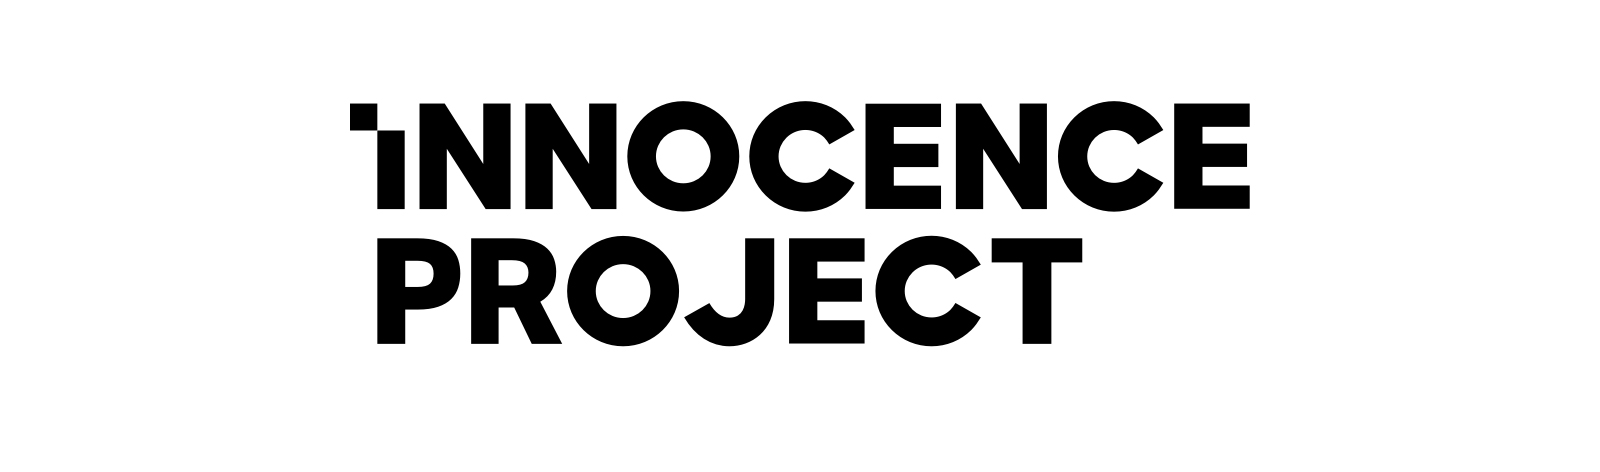 research the innocence project